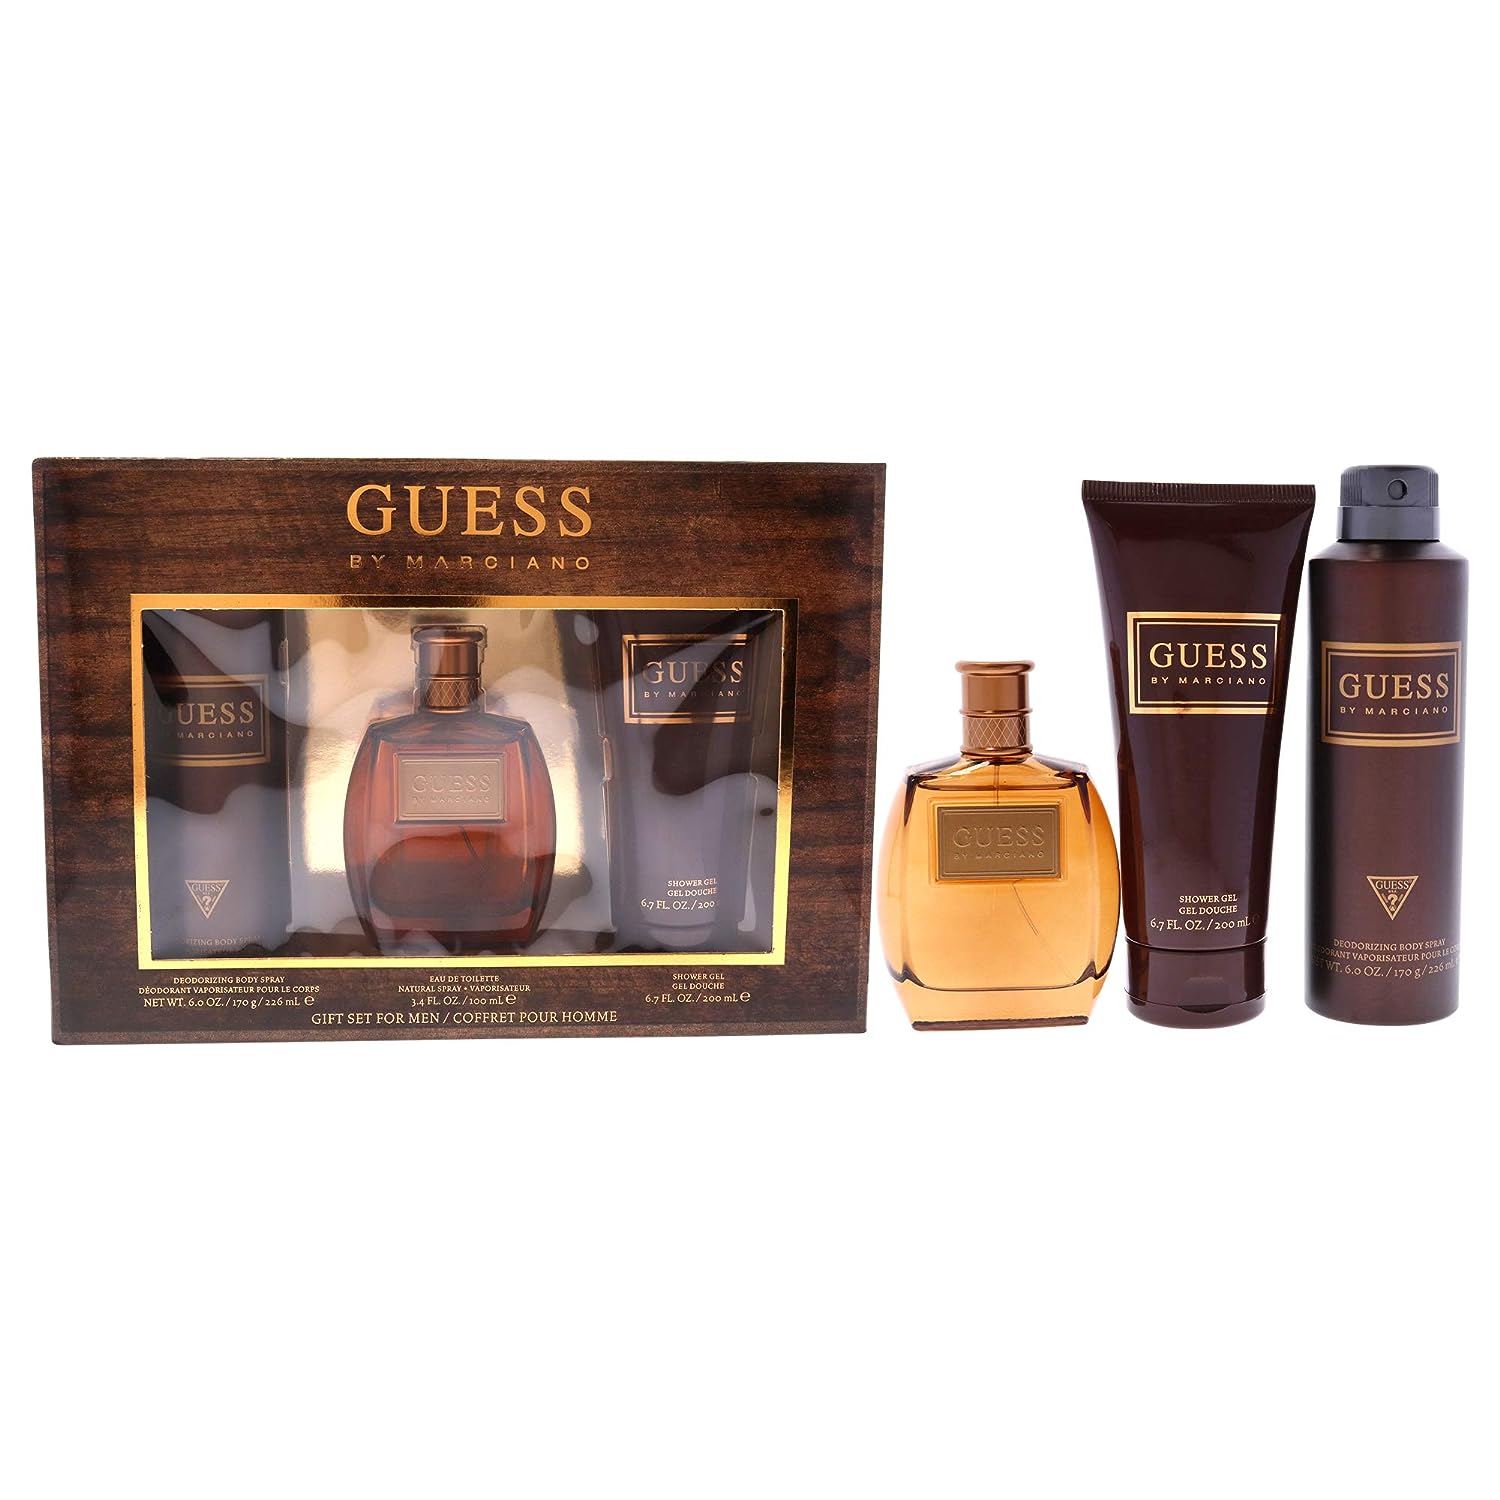 Guess By Marciano Gift Set Beautiful